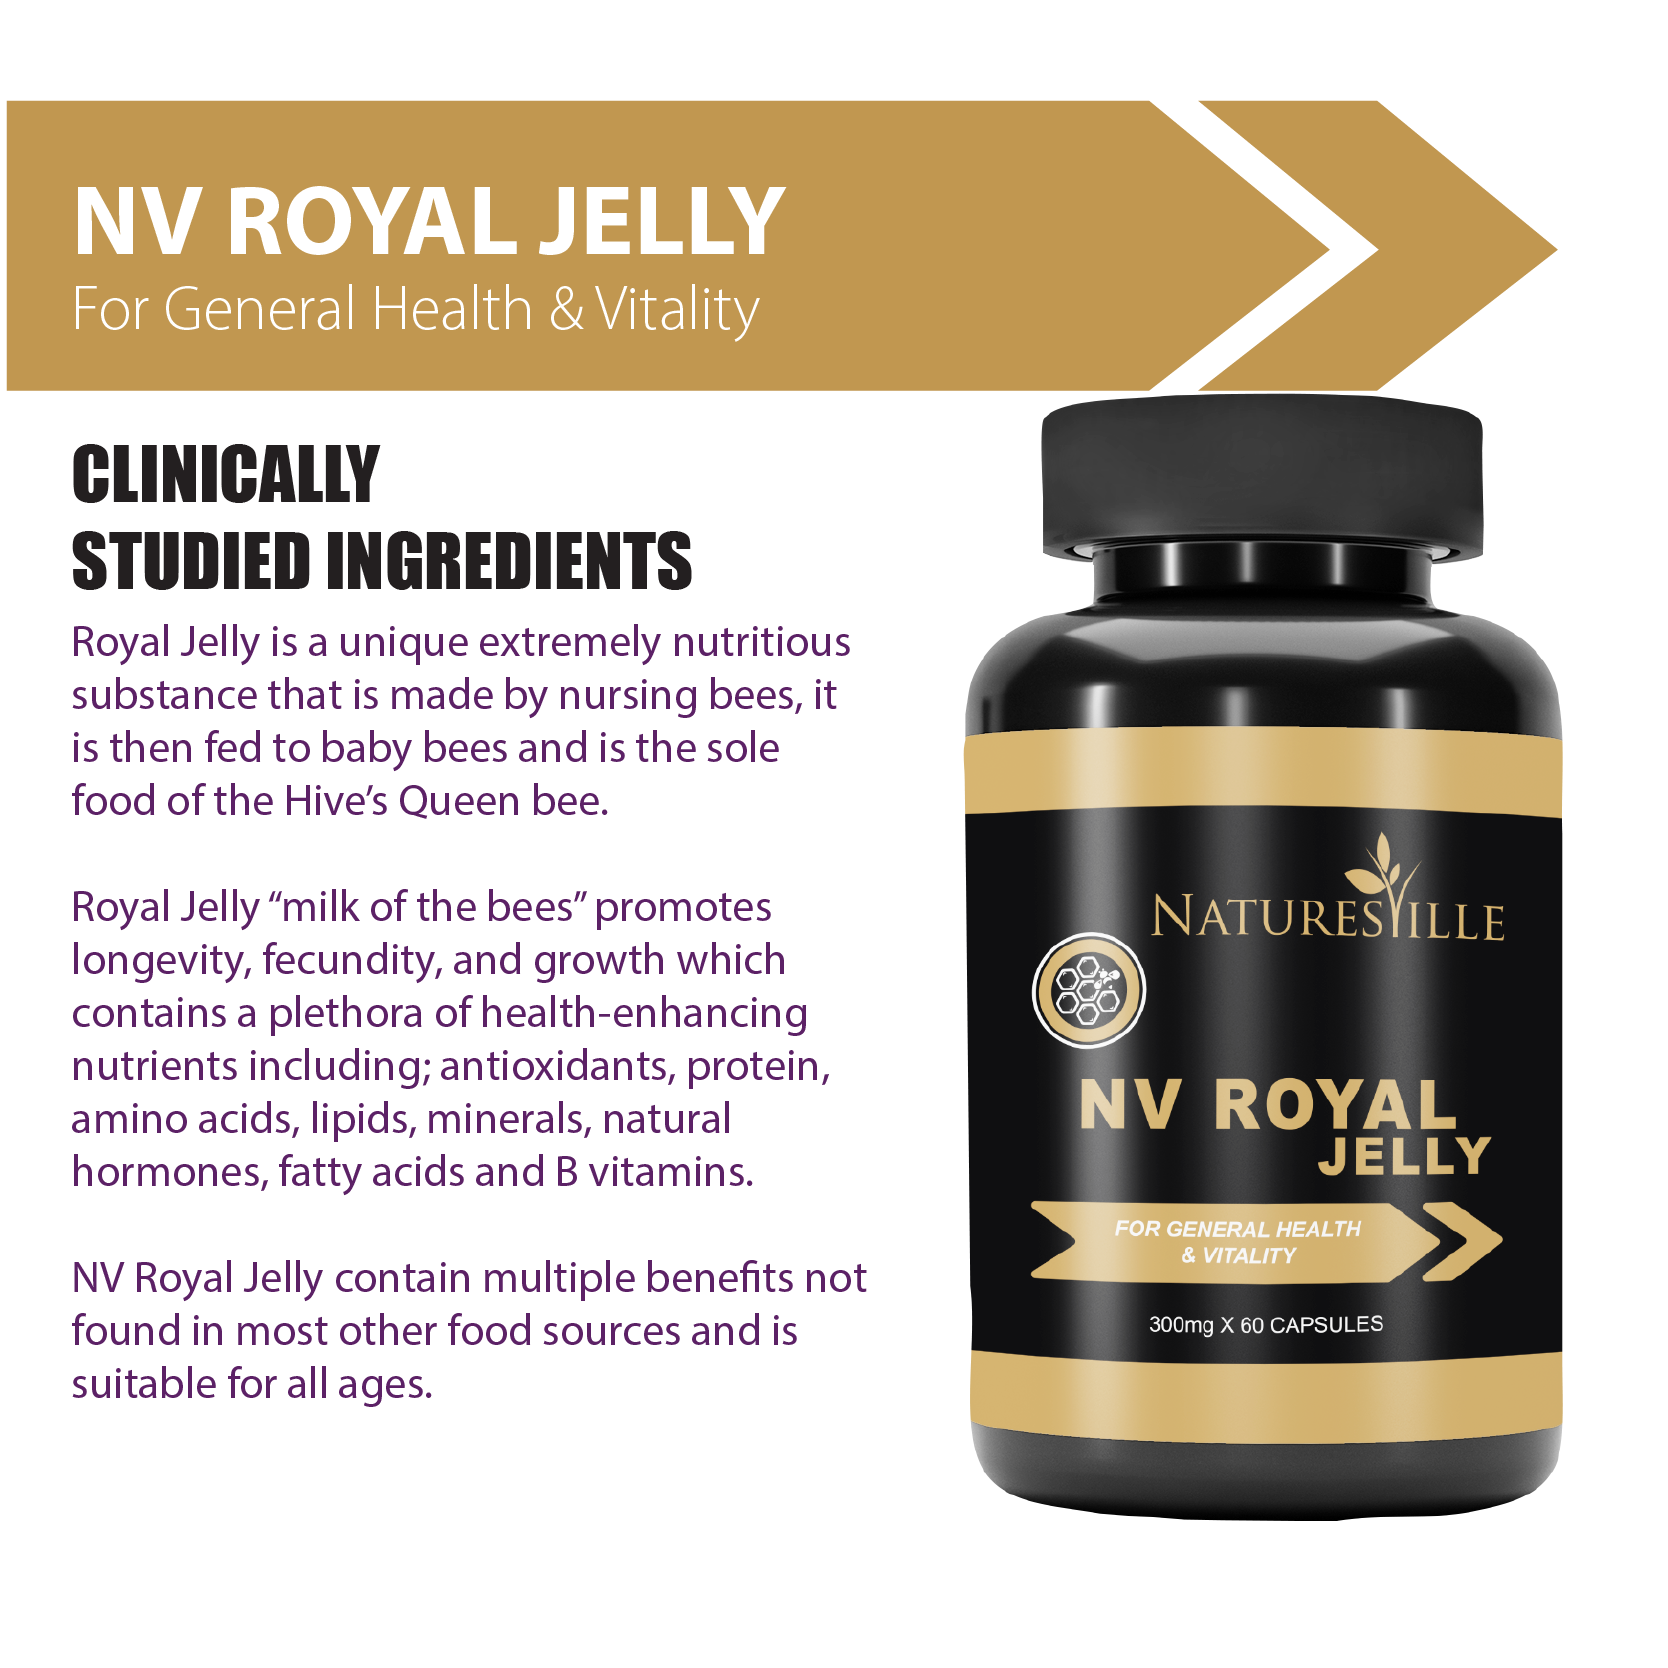 NV Royal Jelly - Natures Ville